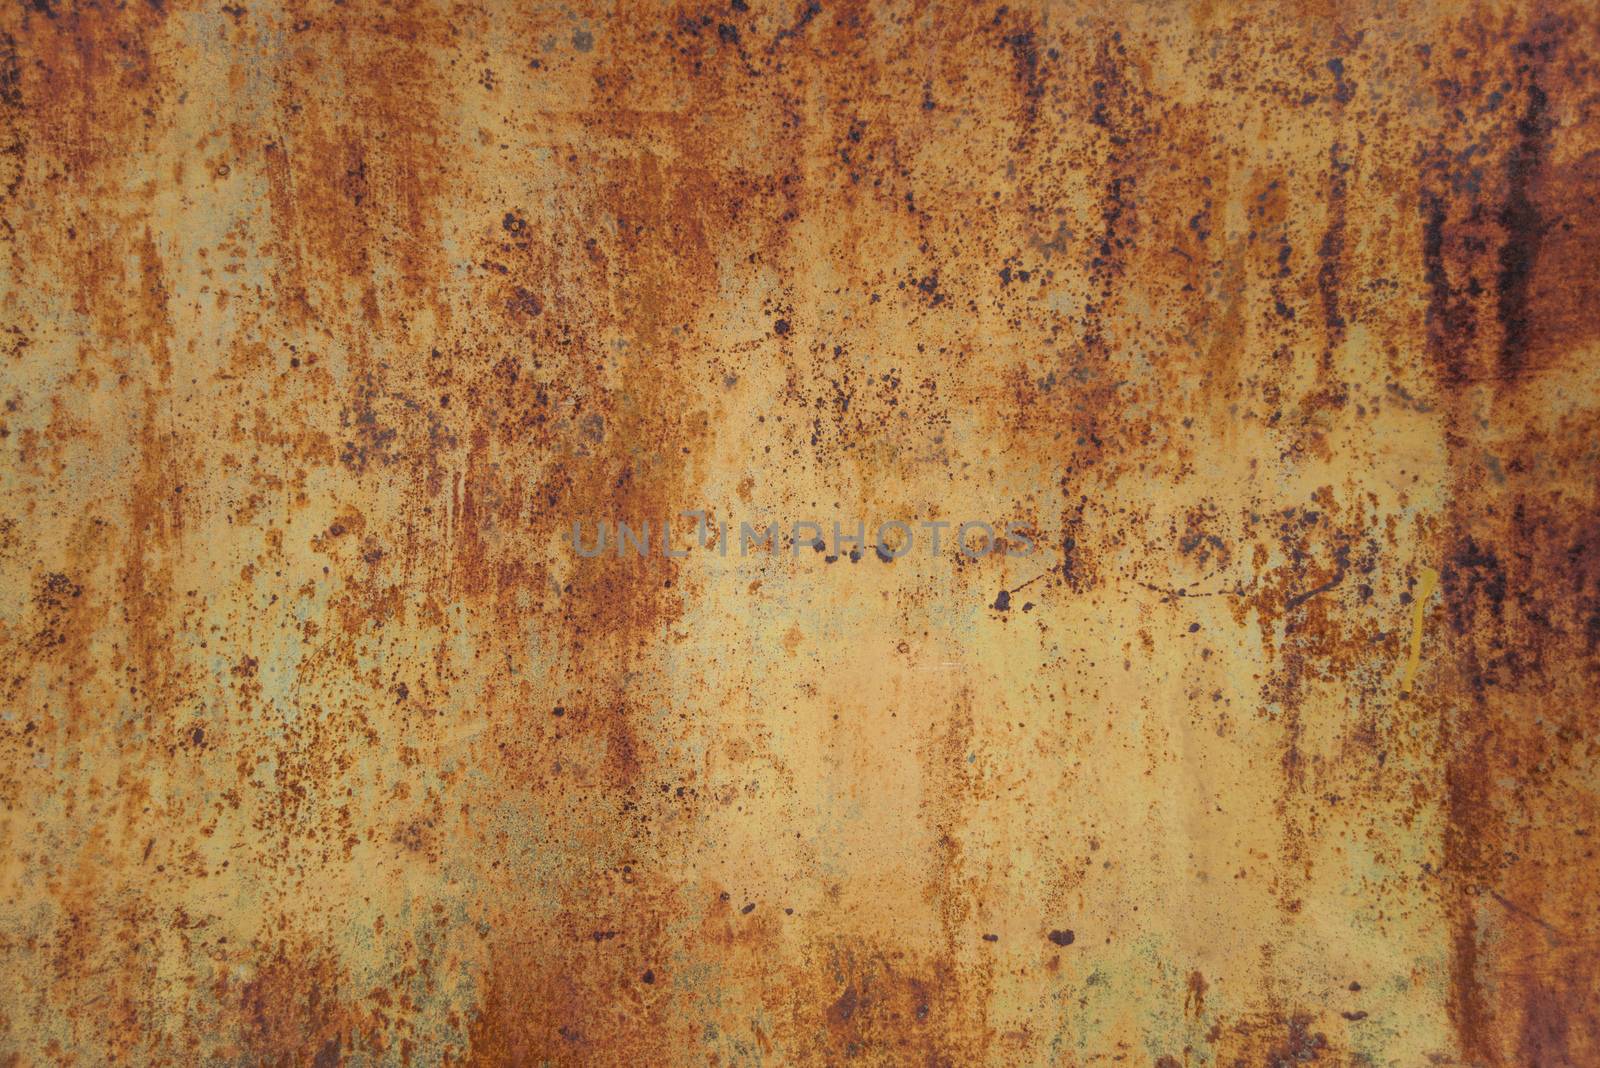 Brown background: old metal surface with orange paint and creased texture